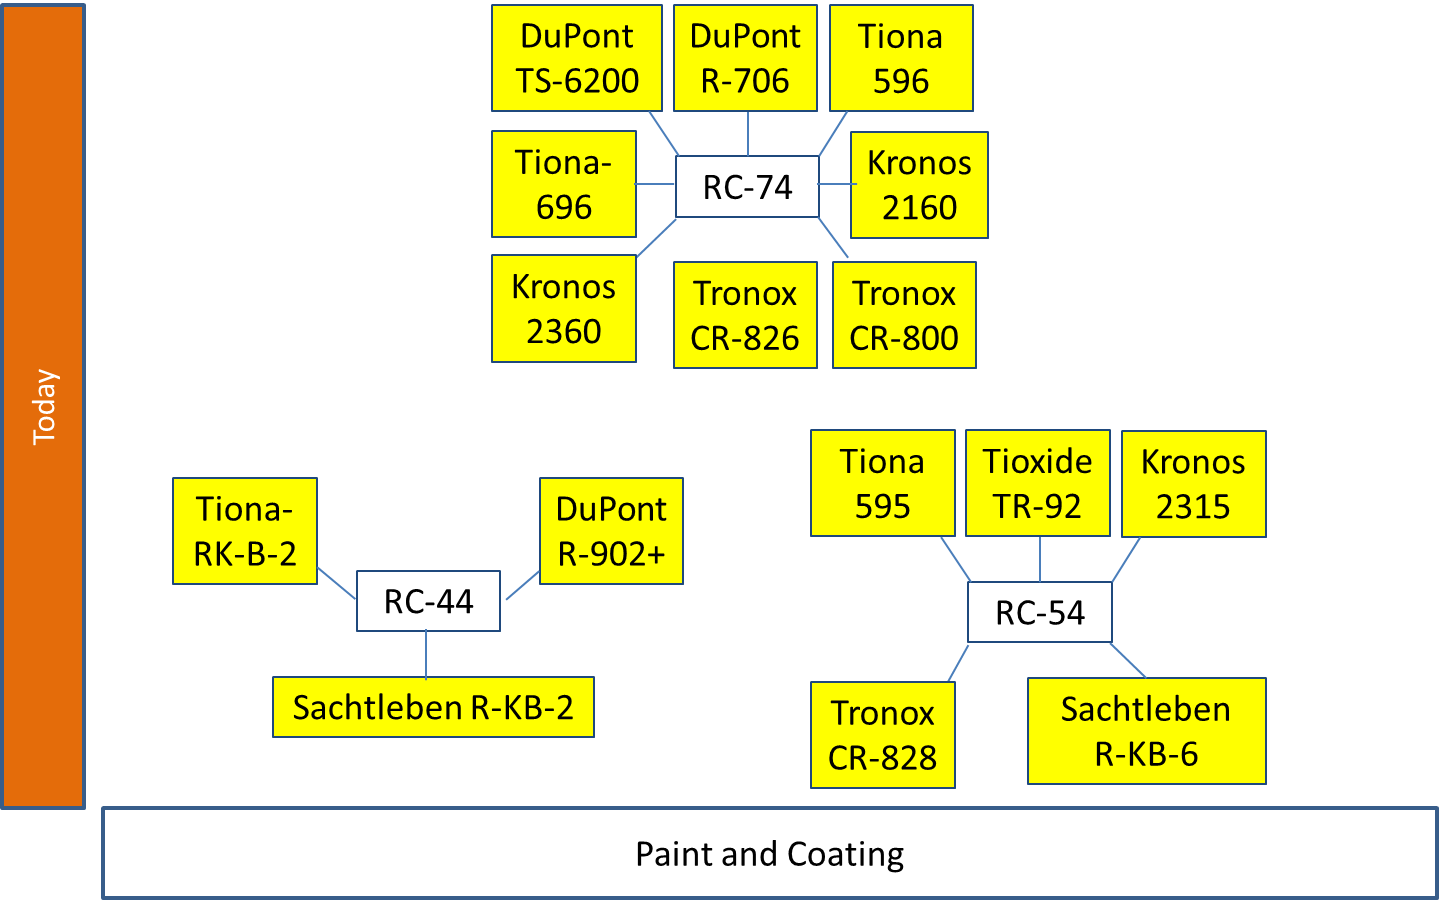 Paint and Coating Grades technologies for RC-44 and RC-54 and RC-74